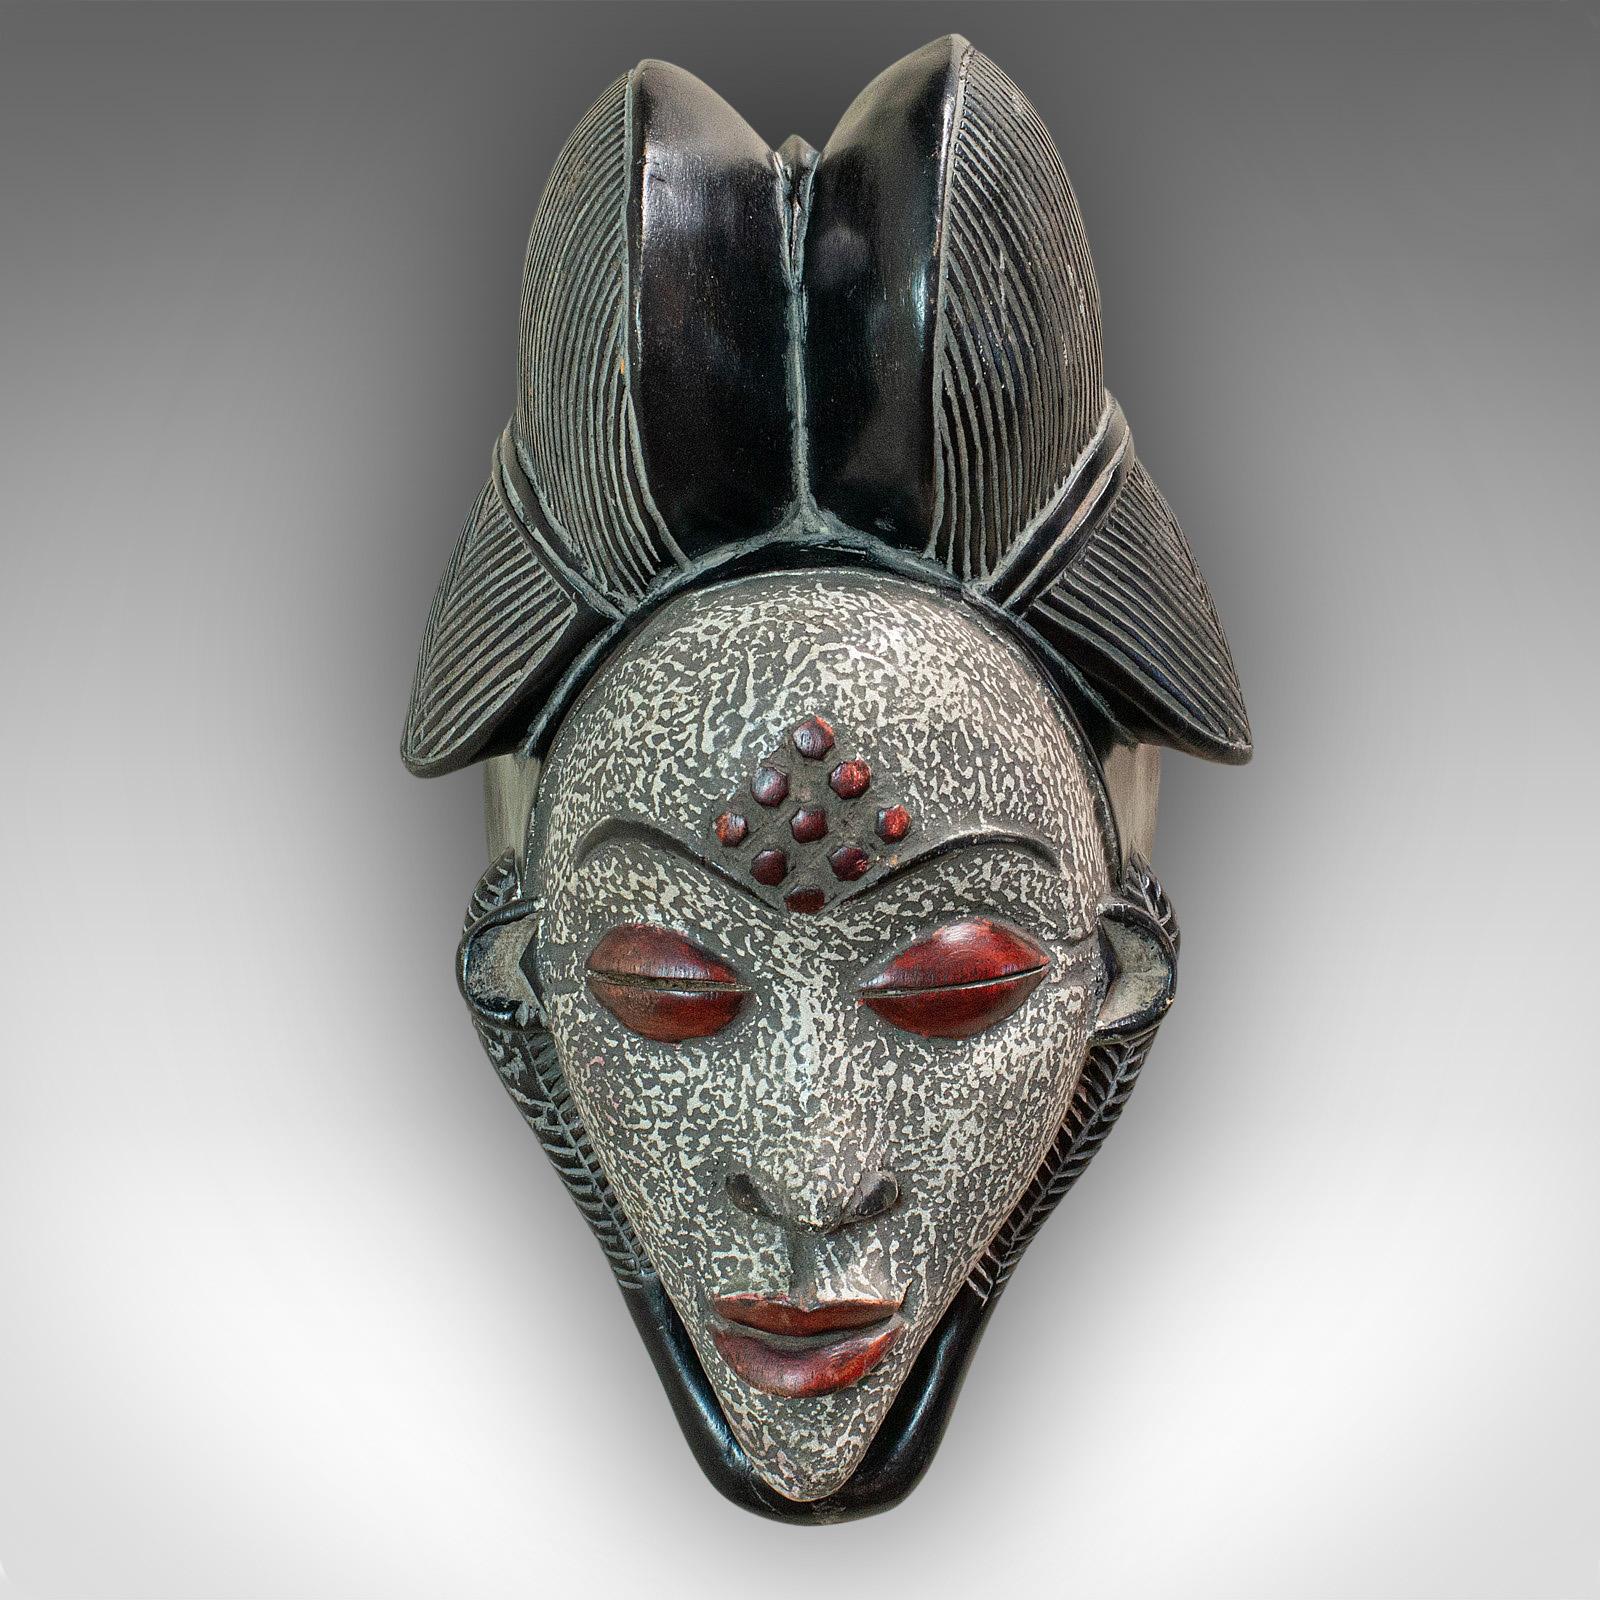 This is a vintage Gabonese Punu mask. An African, tropical hardwood decorative tribal mask, dating to the 20th century, circa 1970.

Fascinating detail and visual appeal
Displays a desirable aged patina
Carved tropical hardwood in good